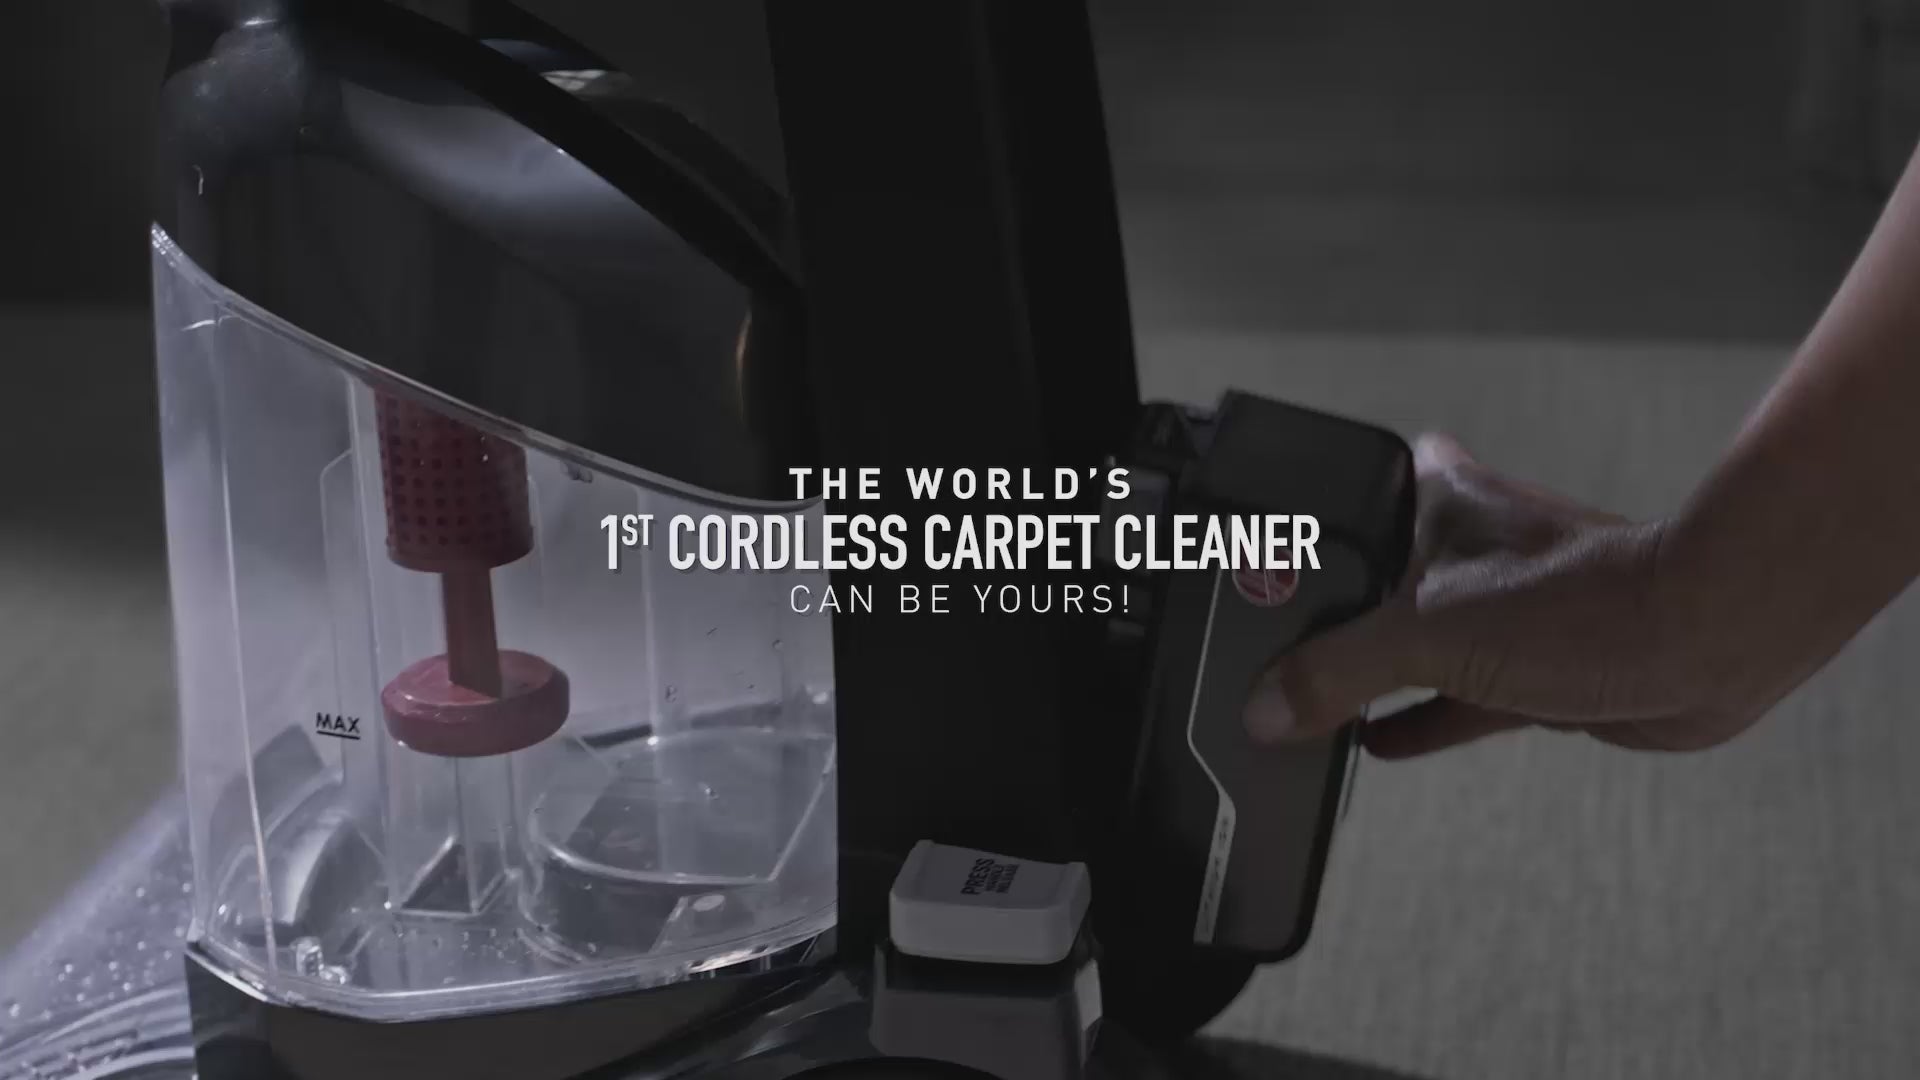 Cordless Carpet Cleaner being shown in various rooms with carpet and hard floors